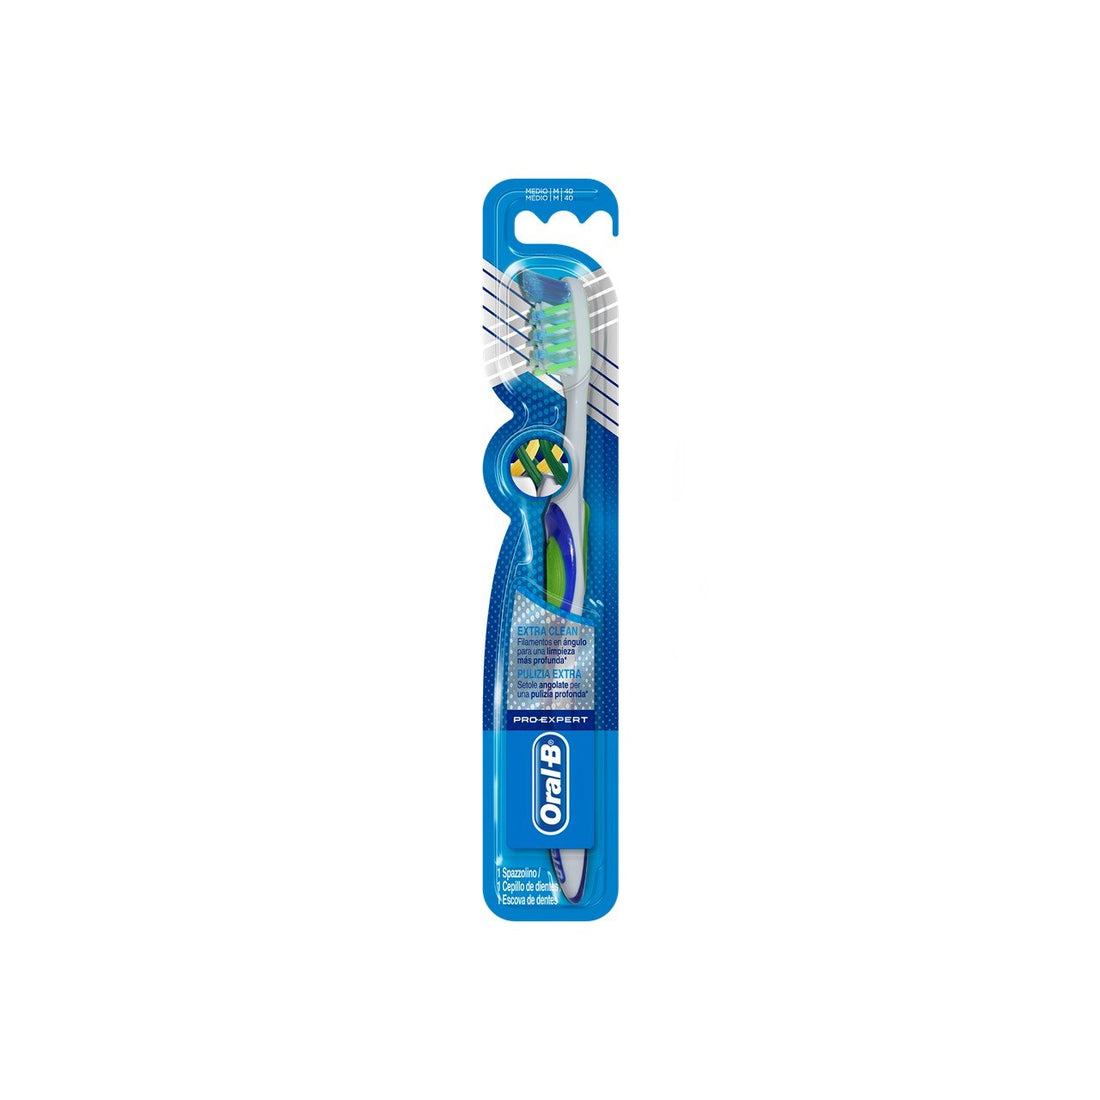 Oral-B Pro-Expert Brosse à dents extra propre moyenne